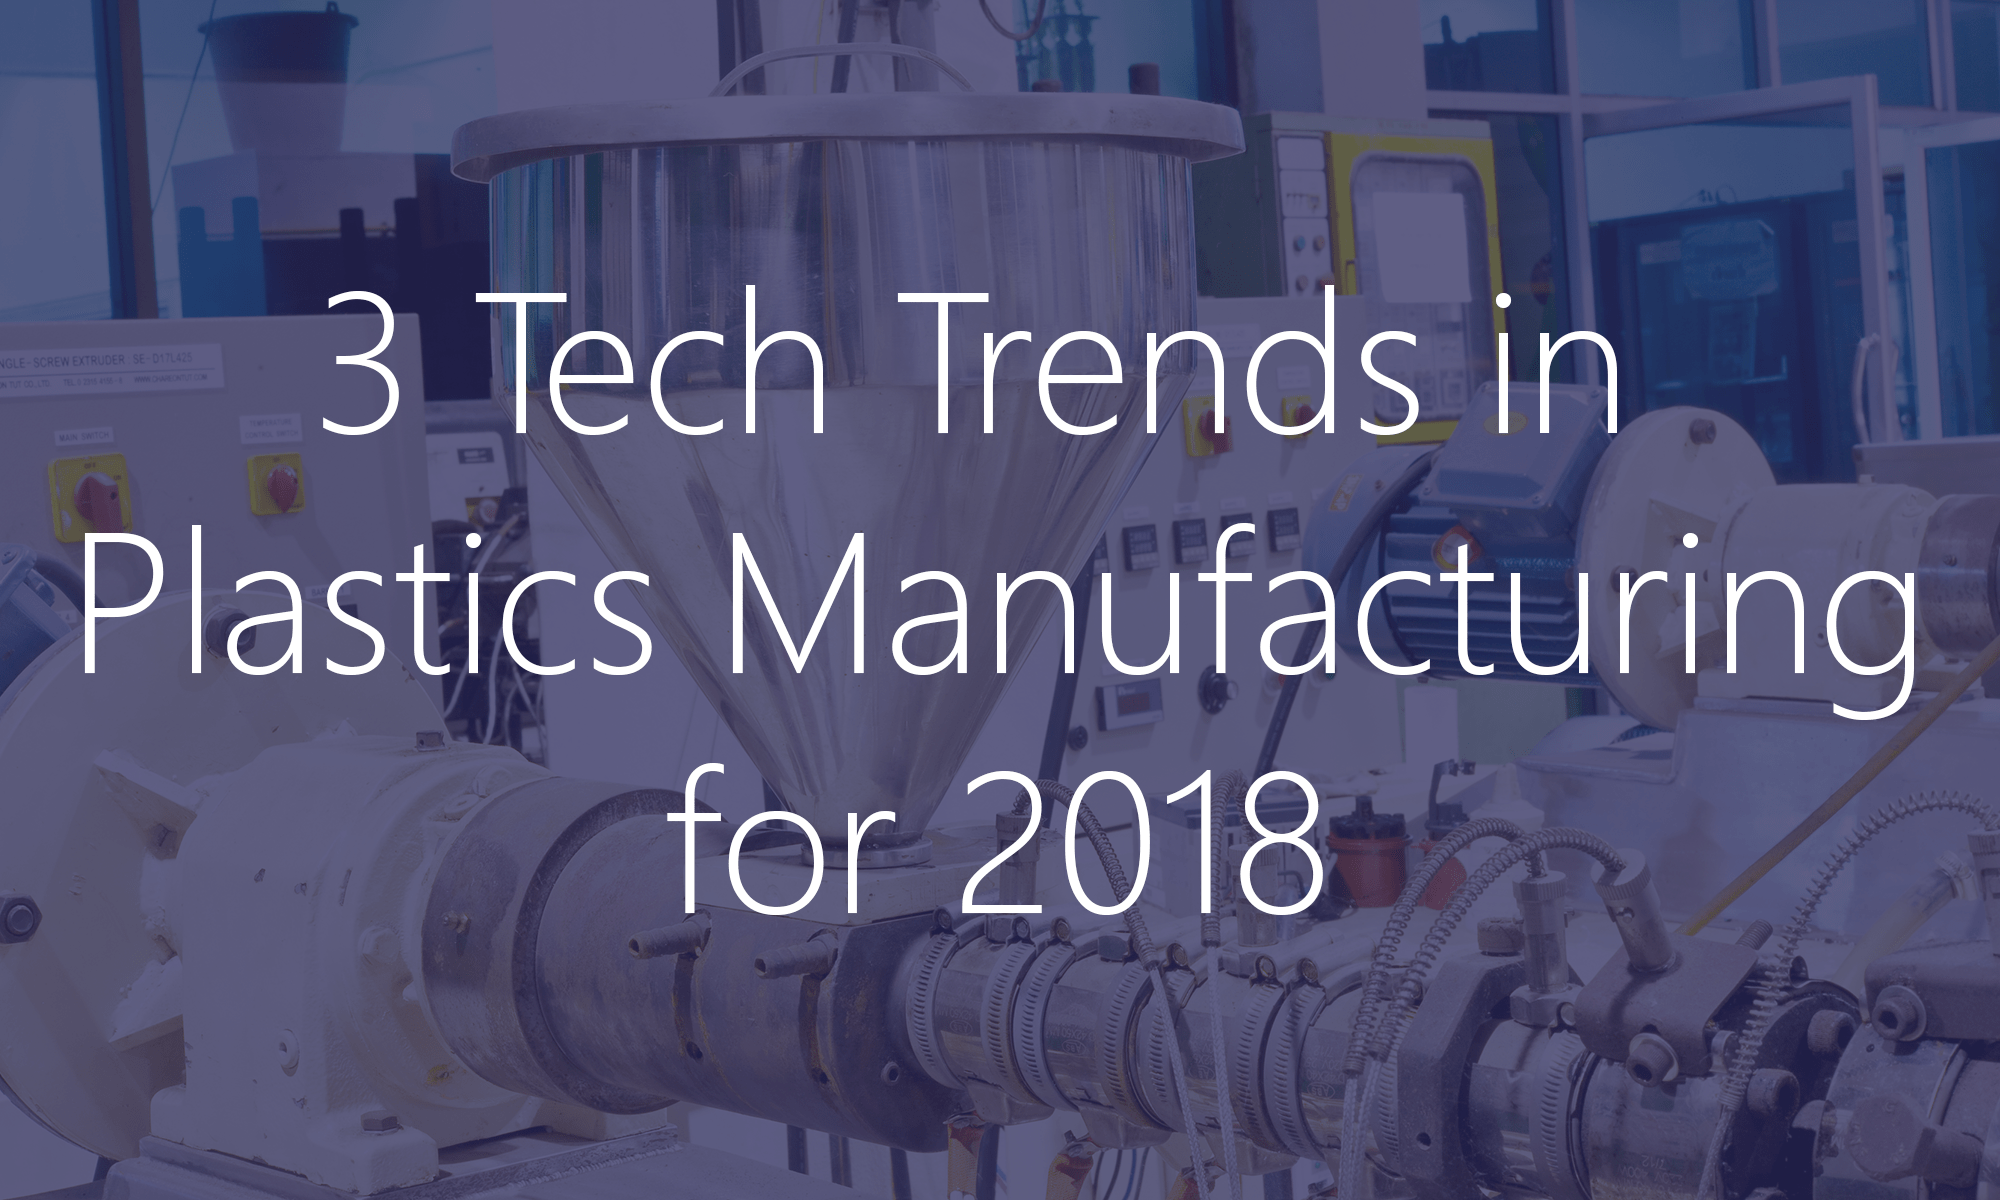 3 Tech Trends in Plastics Manufacturing for 2018